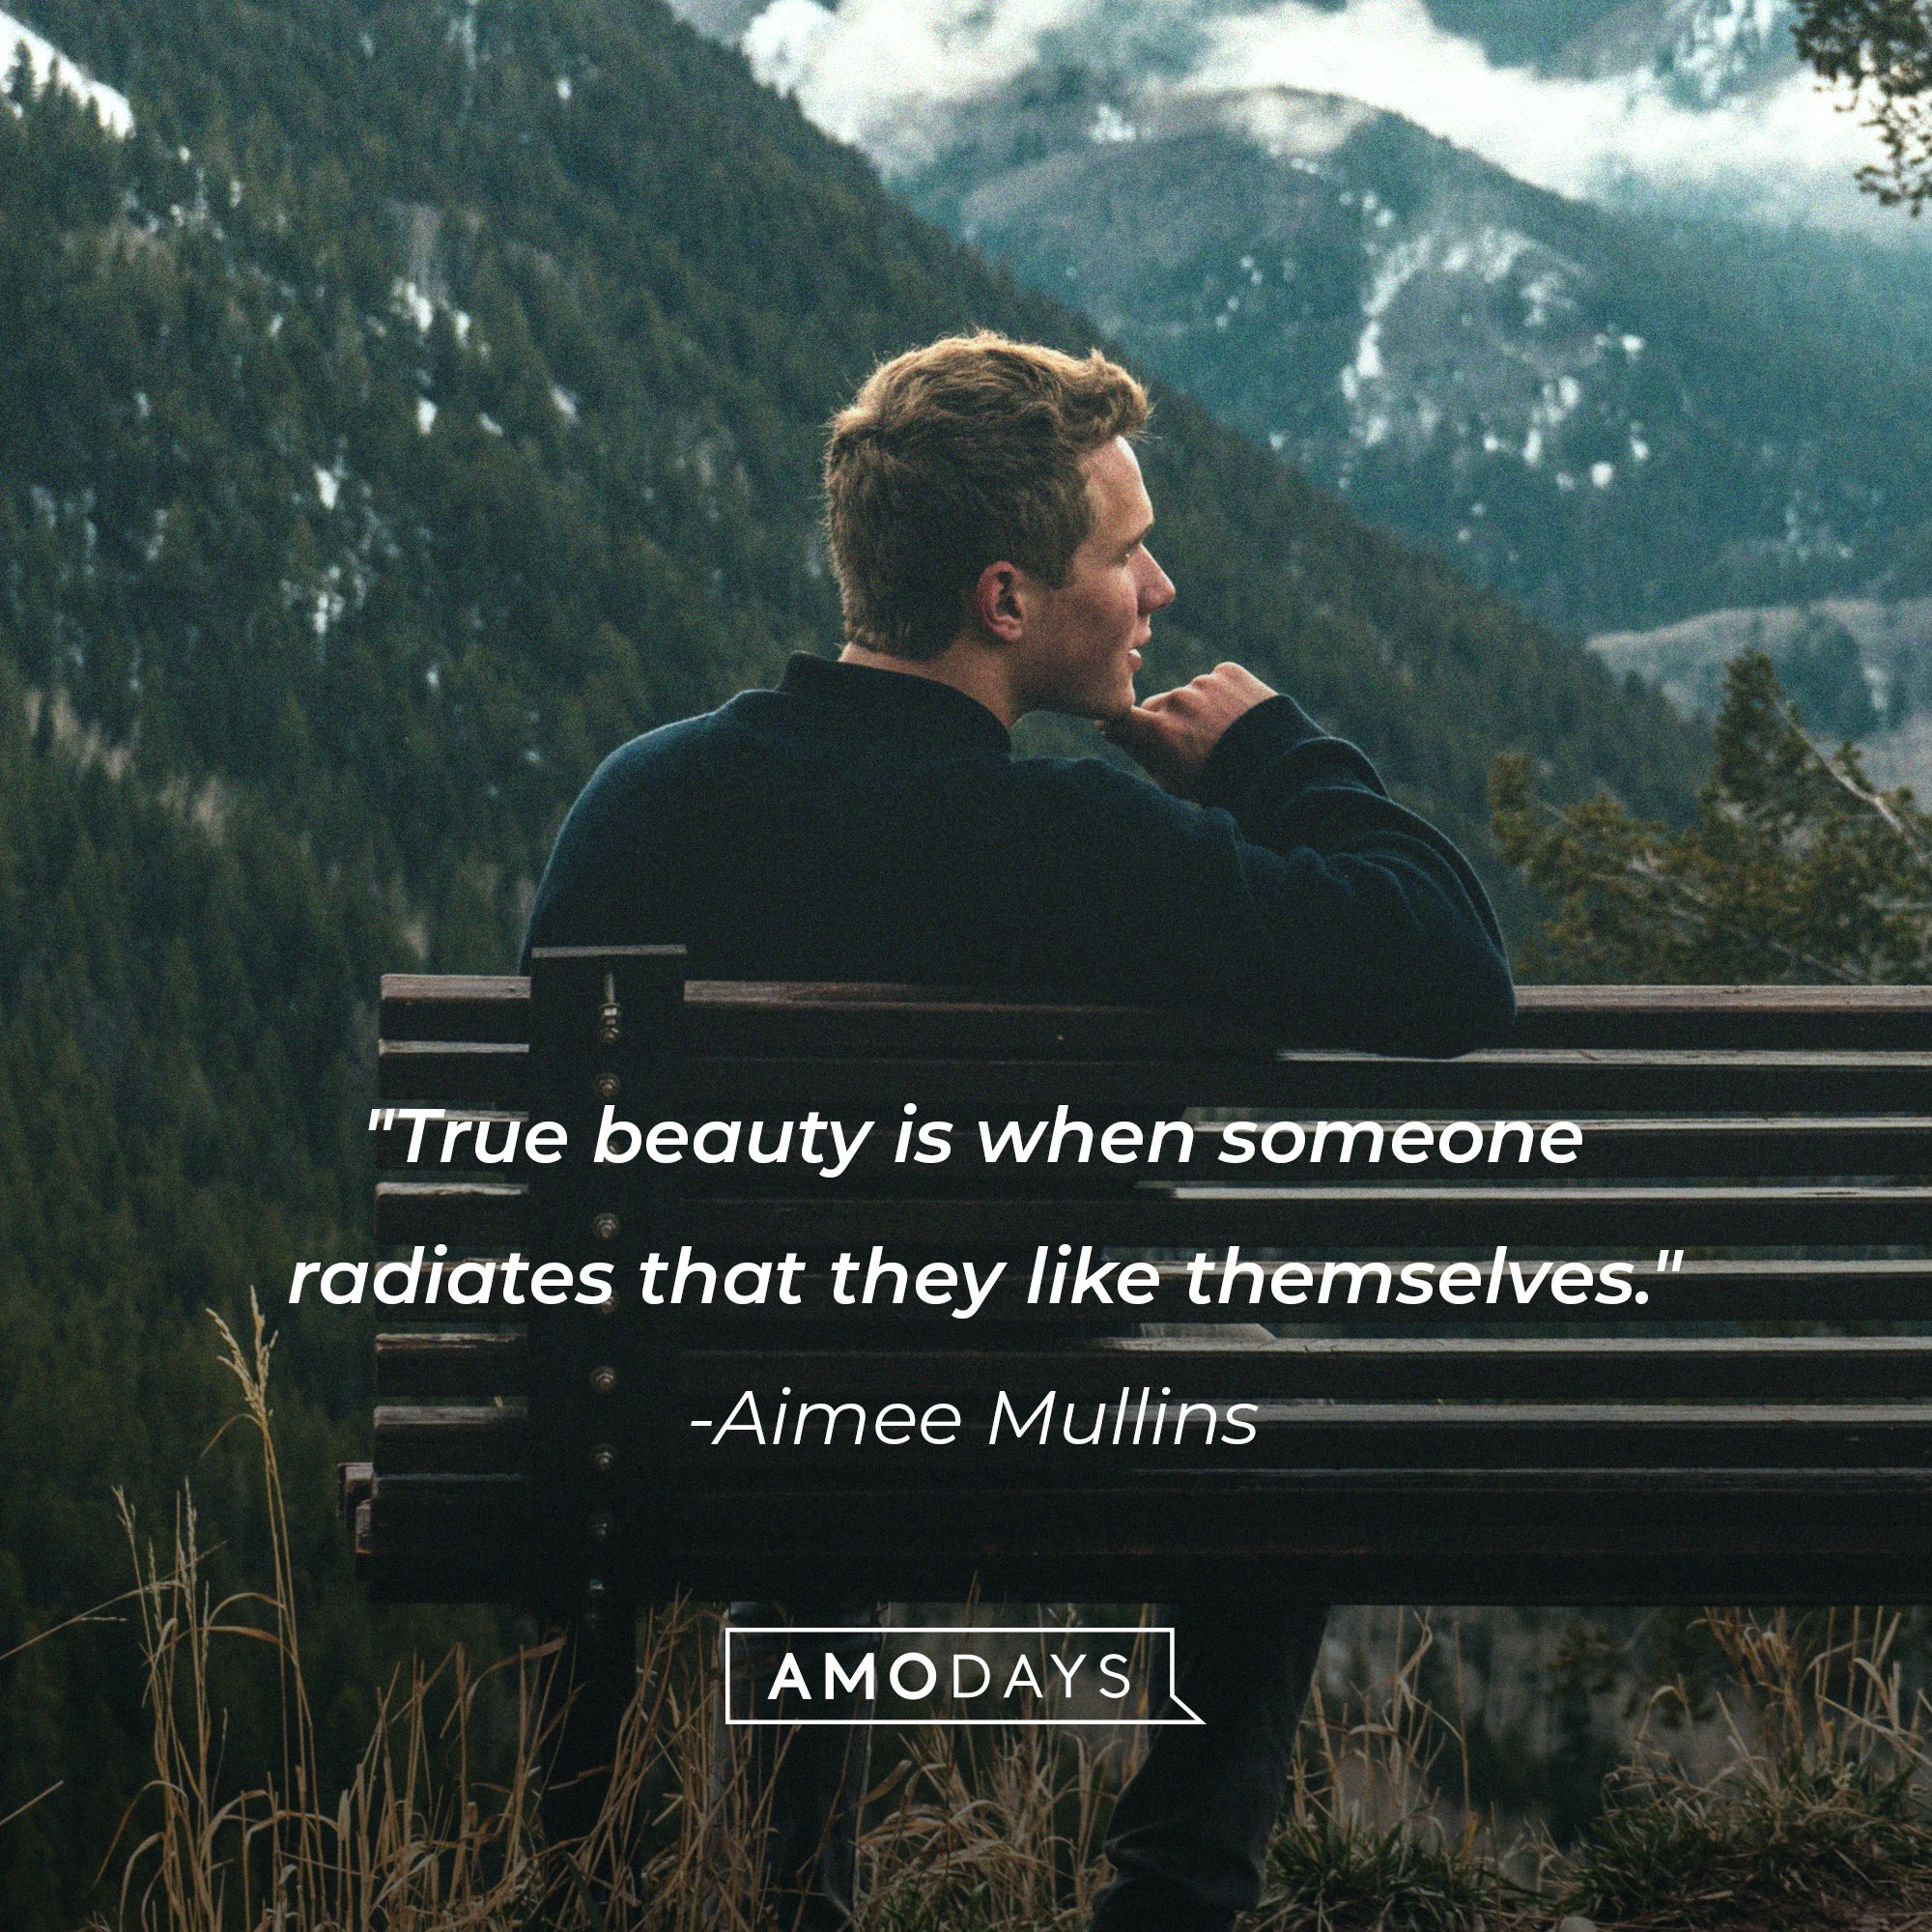 Aimee Mullins’ quote: "True beauty is when someone radiates that they like themselves." | Image: AmoDays   